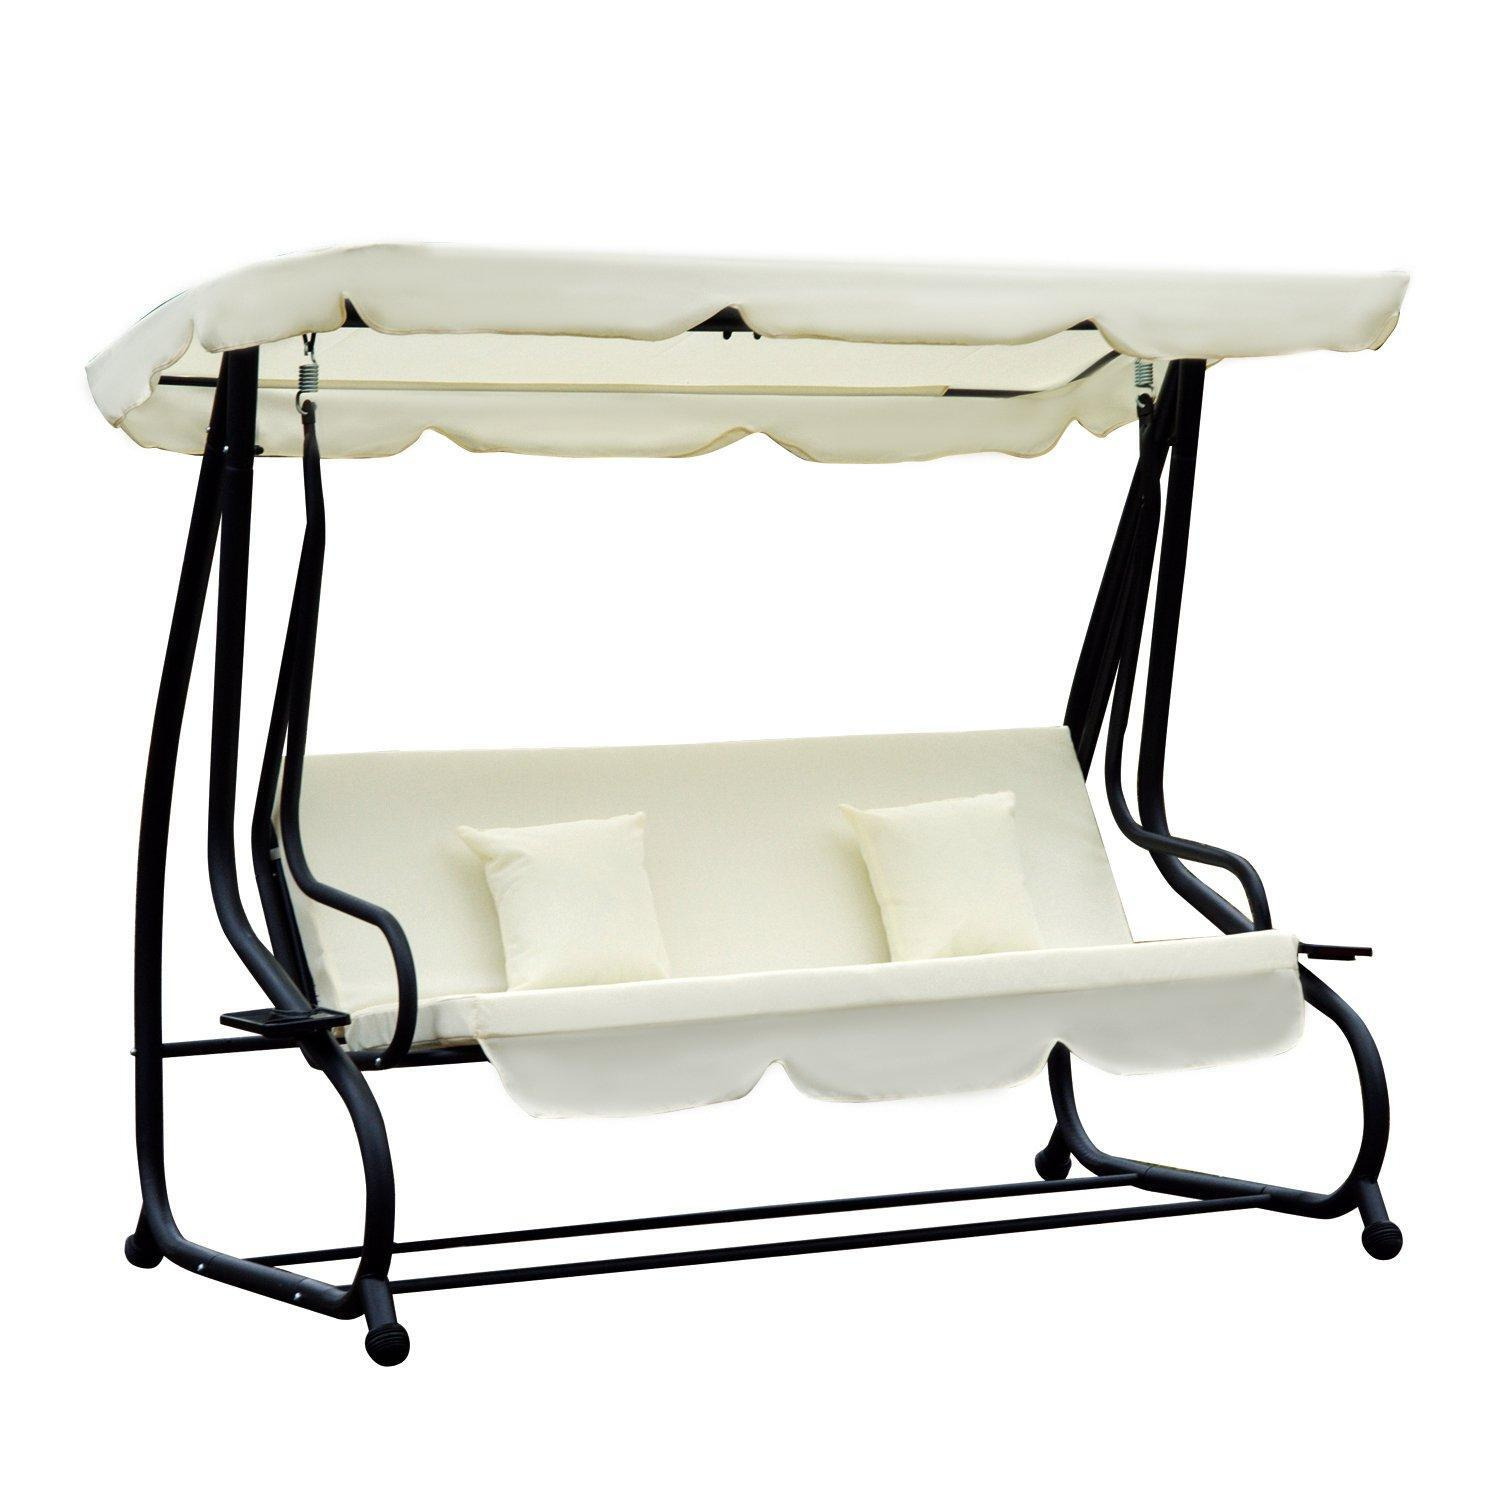 3 Seater Swing Chair for Outdoor with Adjustable Canopy - image 1